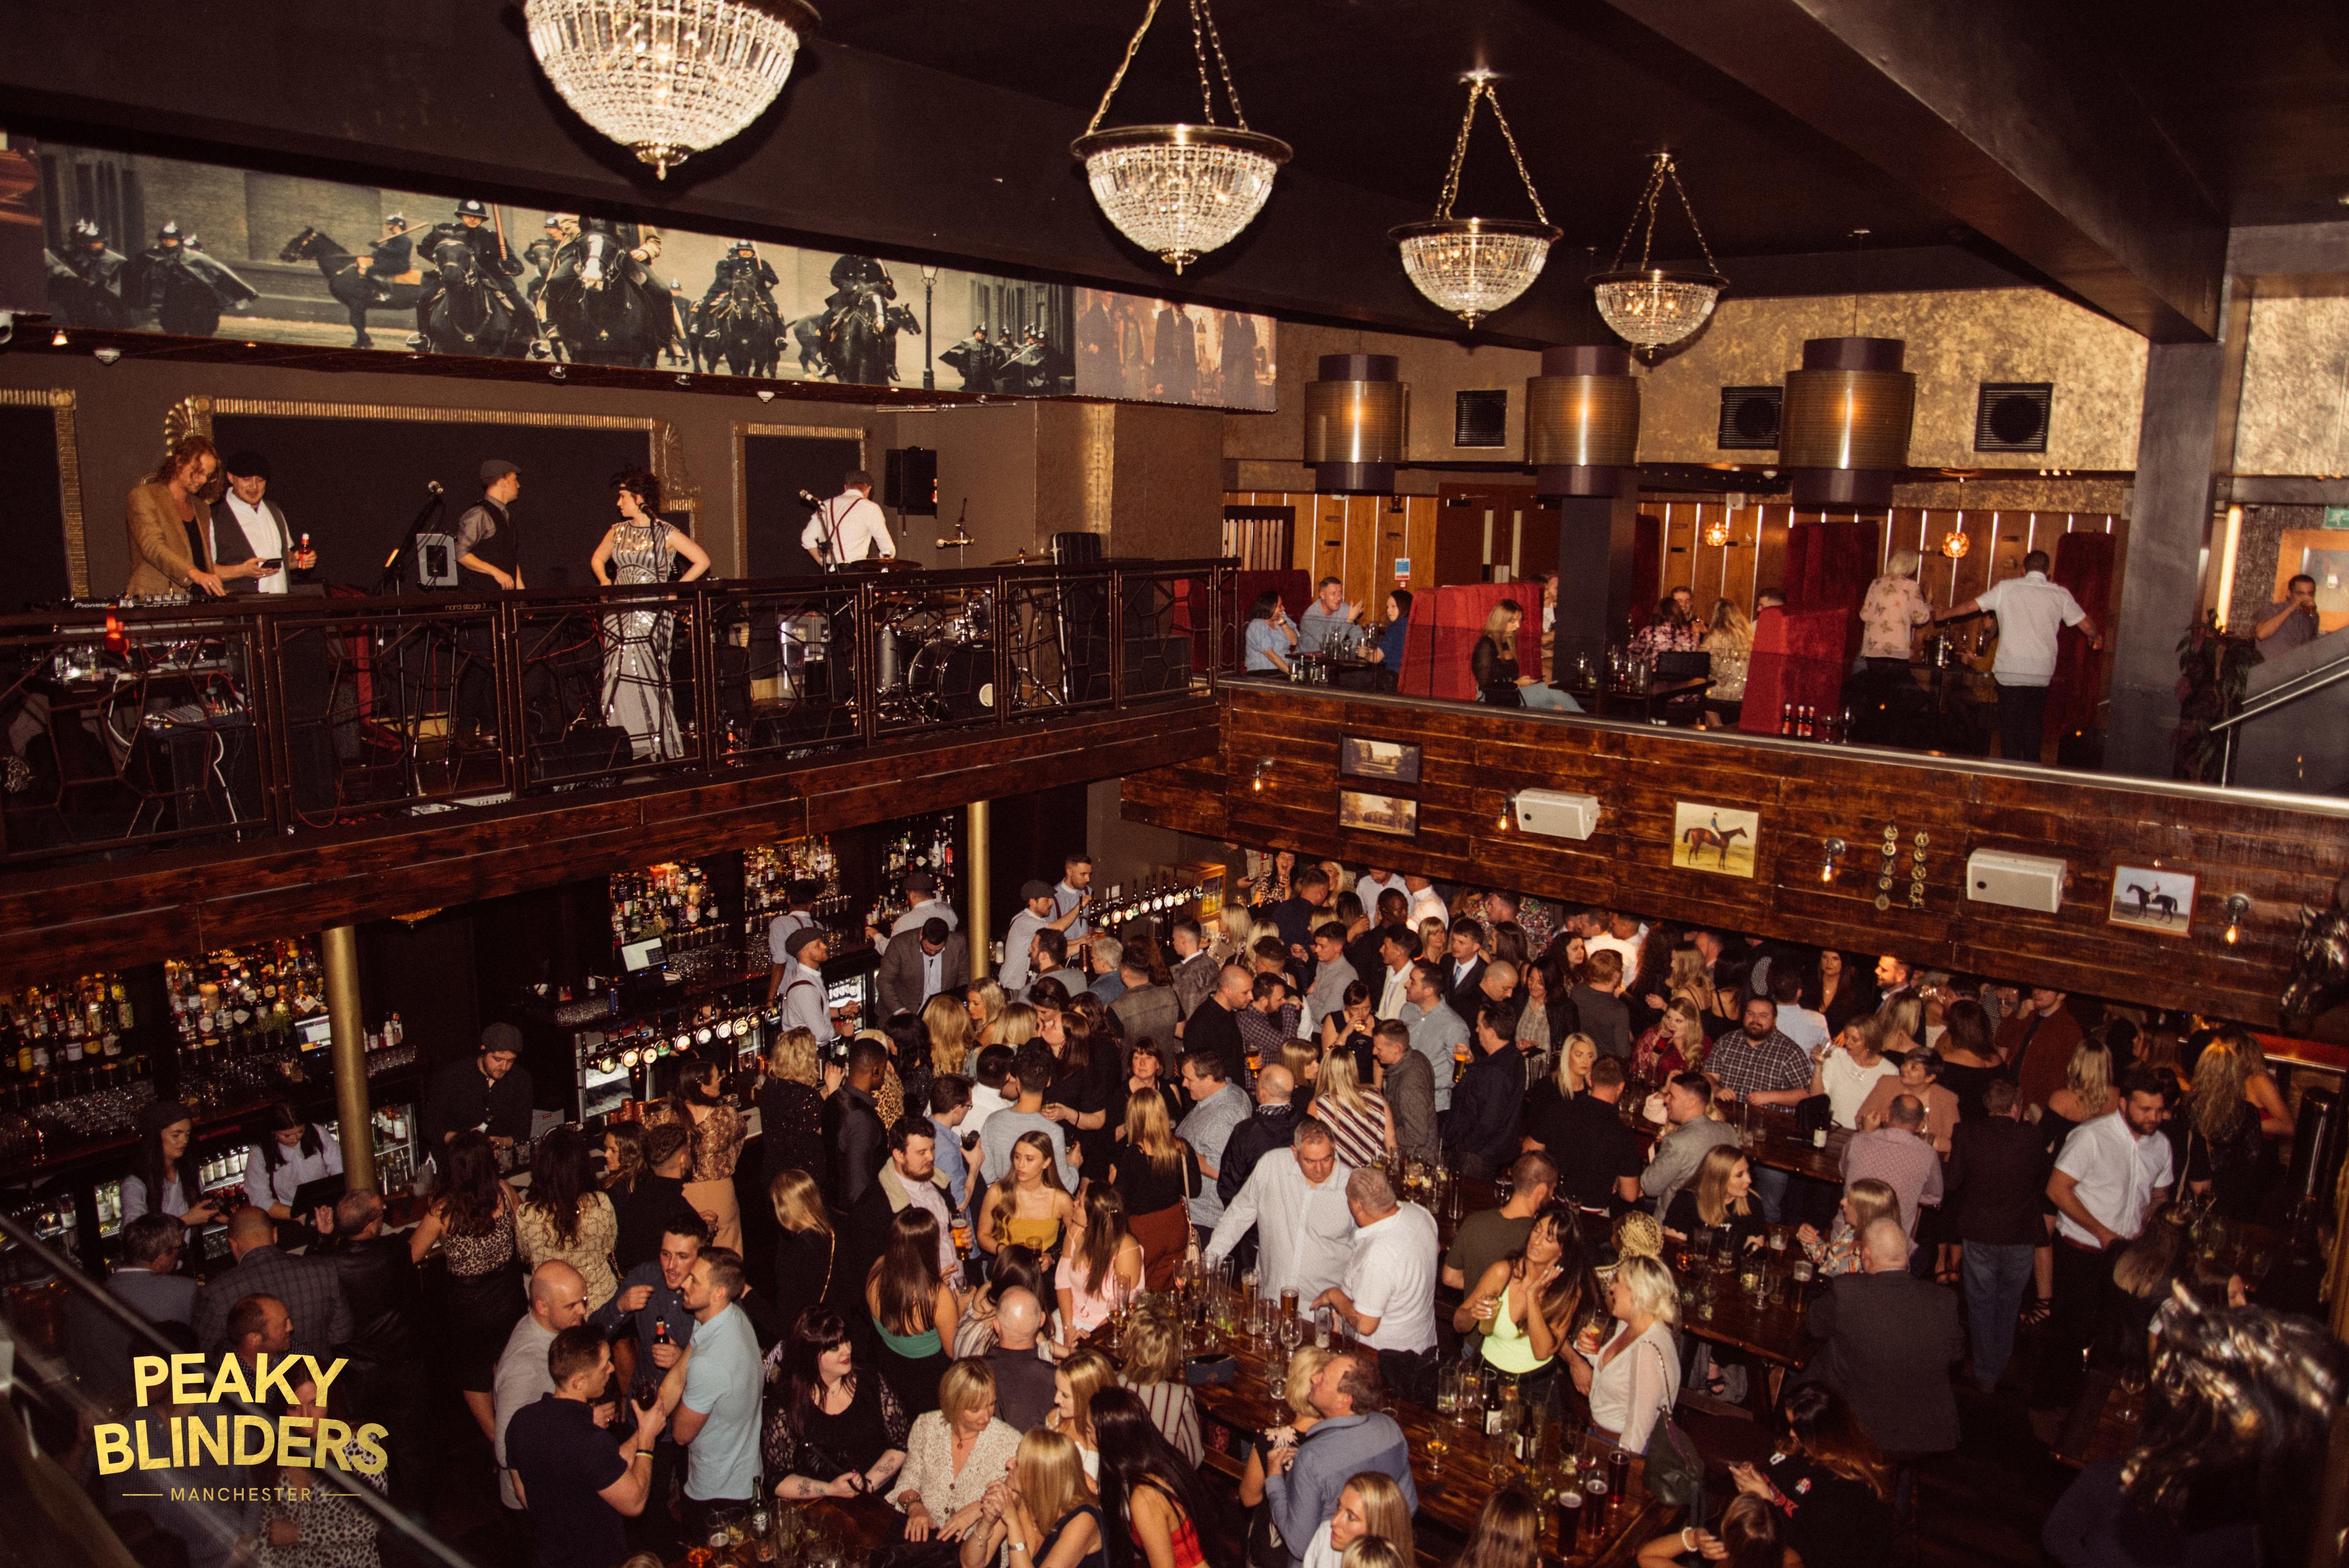 Full Venue Or 3 Private Areas, Peaky Blinders Manchester photo #1